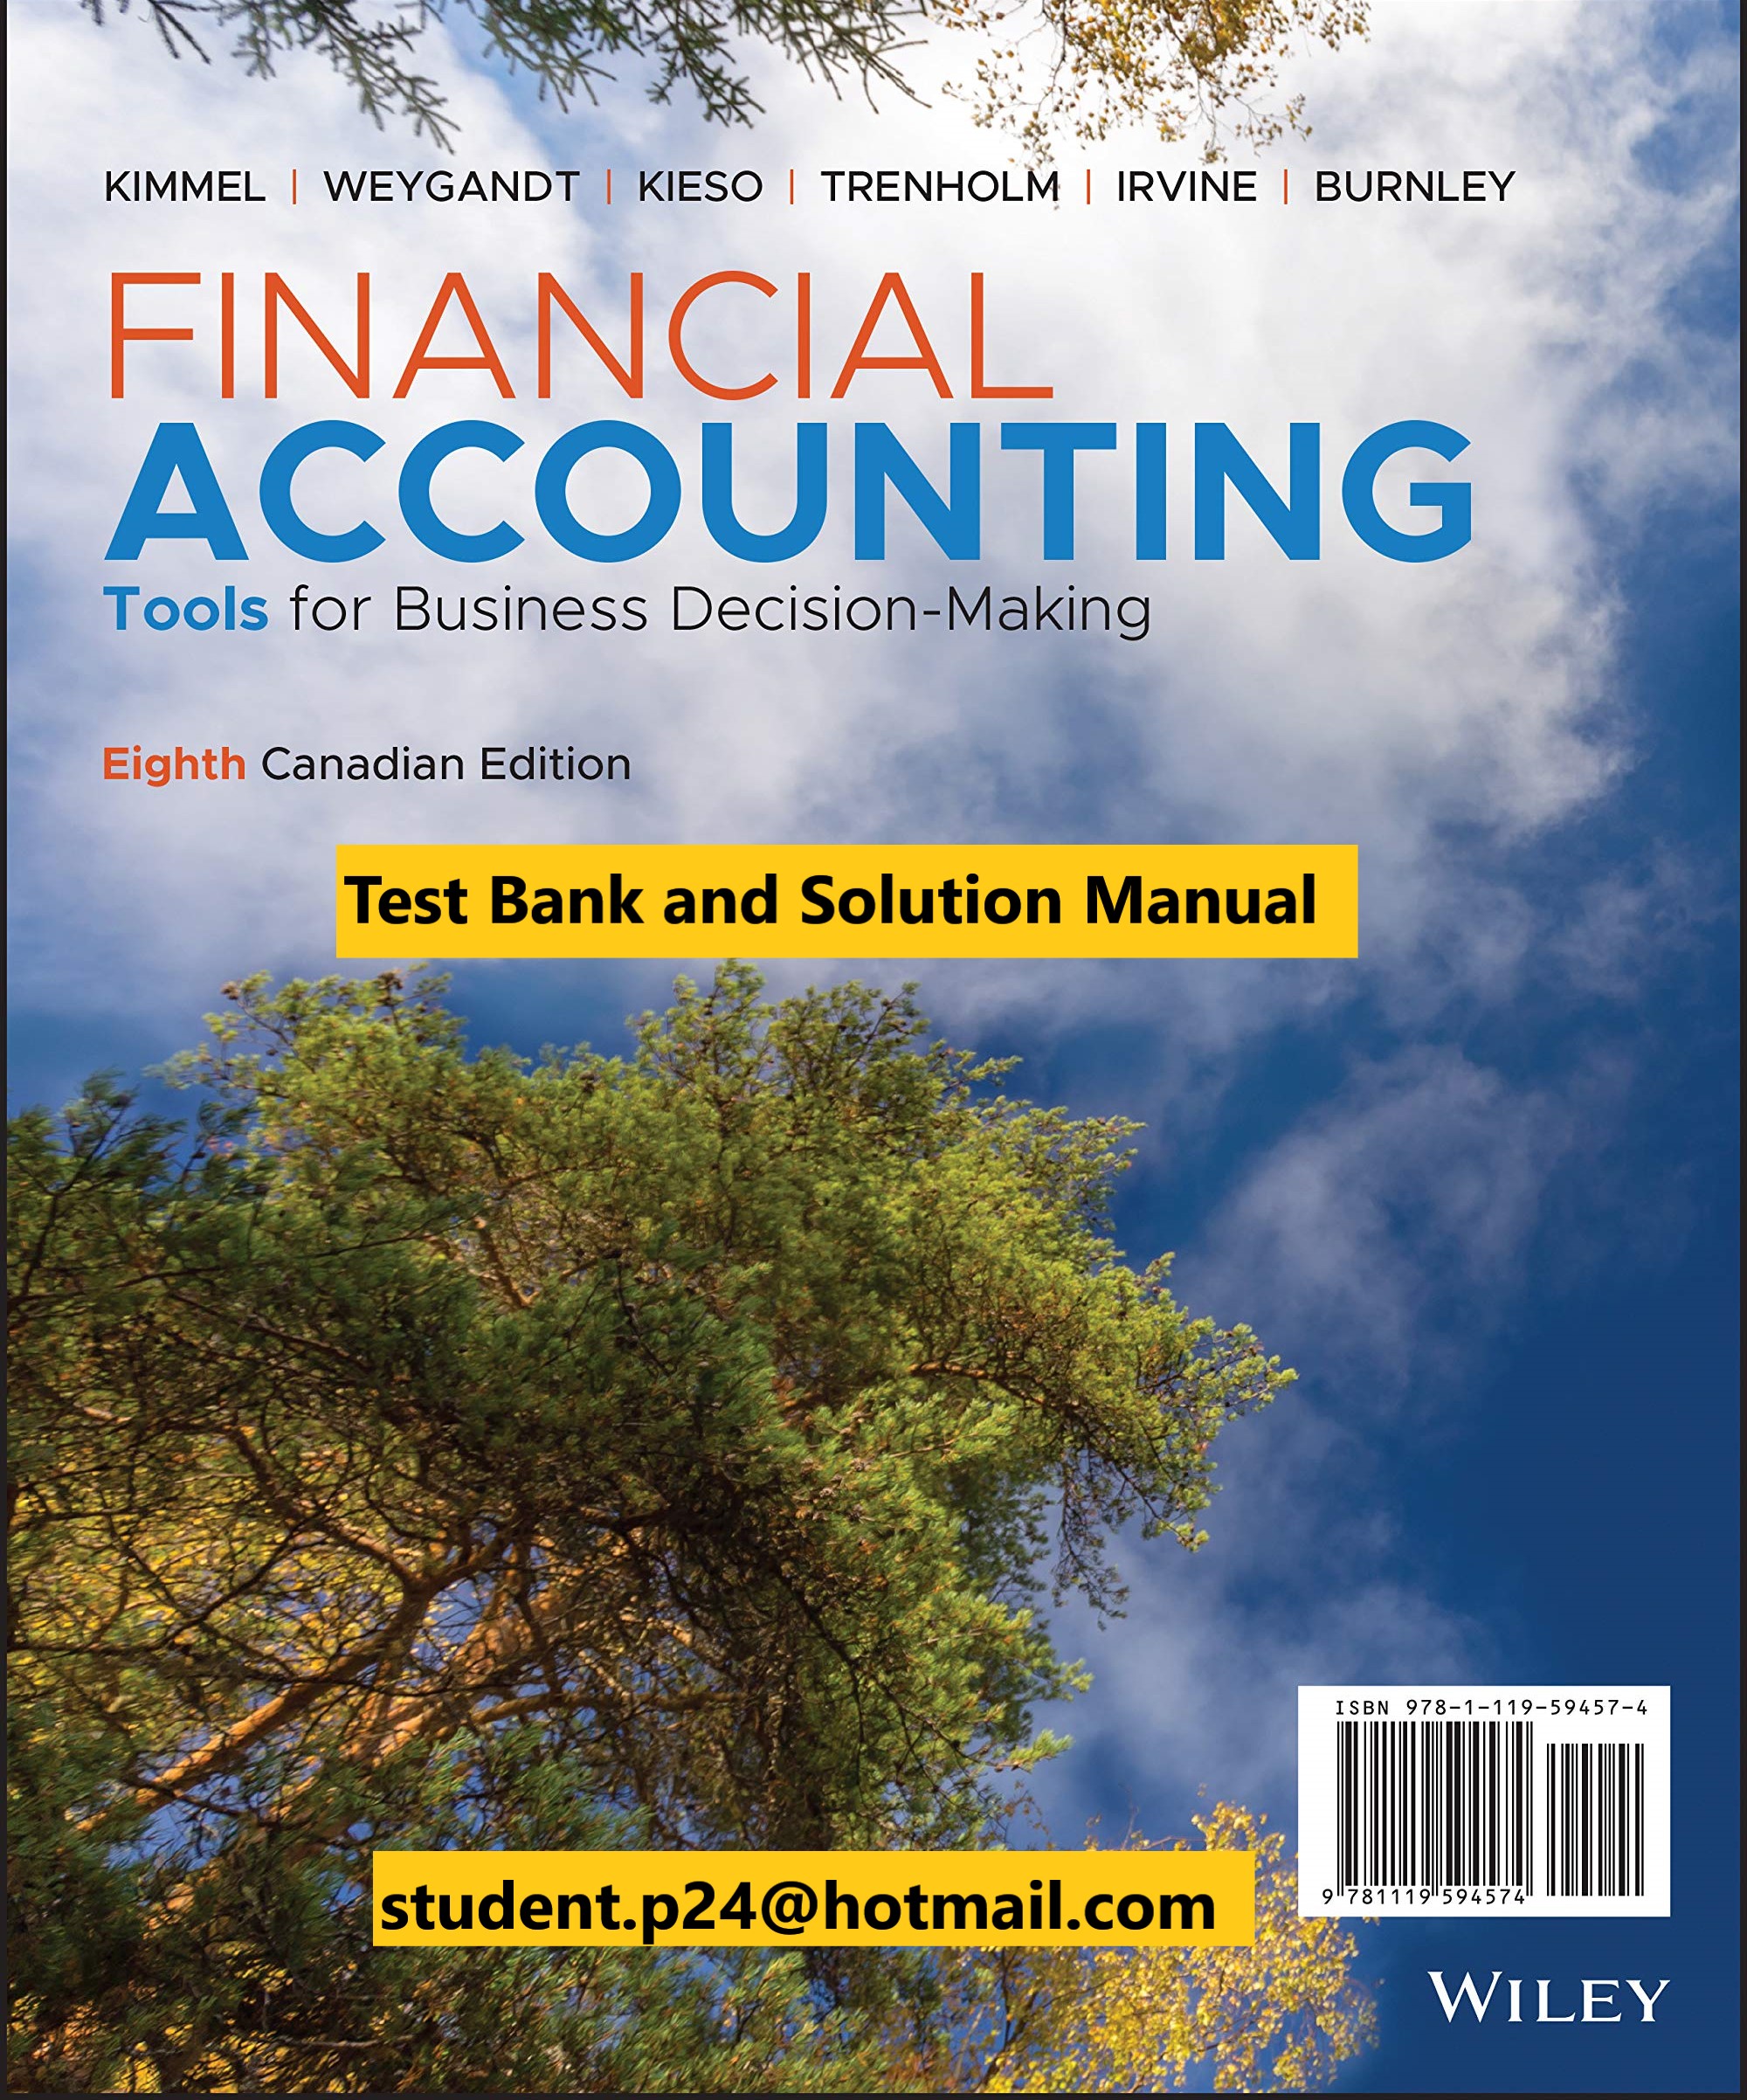 Financial Accounting Tools for Business Decision Making 8th Canadian Edition Kimmel Weygandt Kieso Trenholm Irvine Burnley Test Bank and Solution Manual